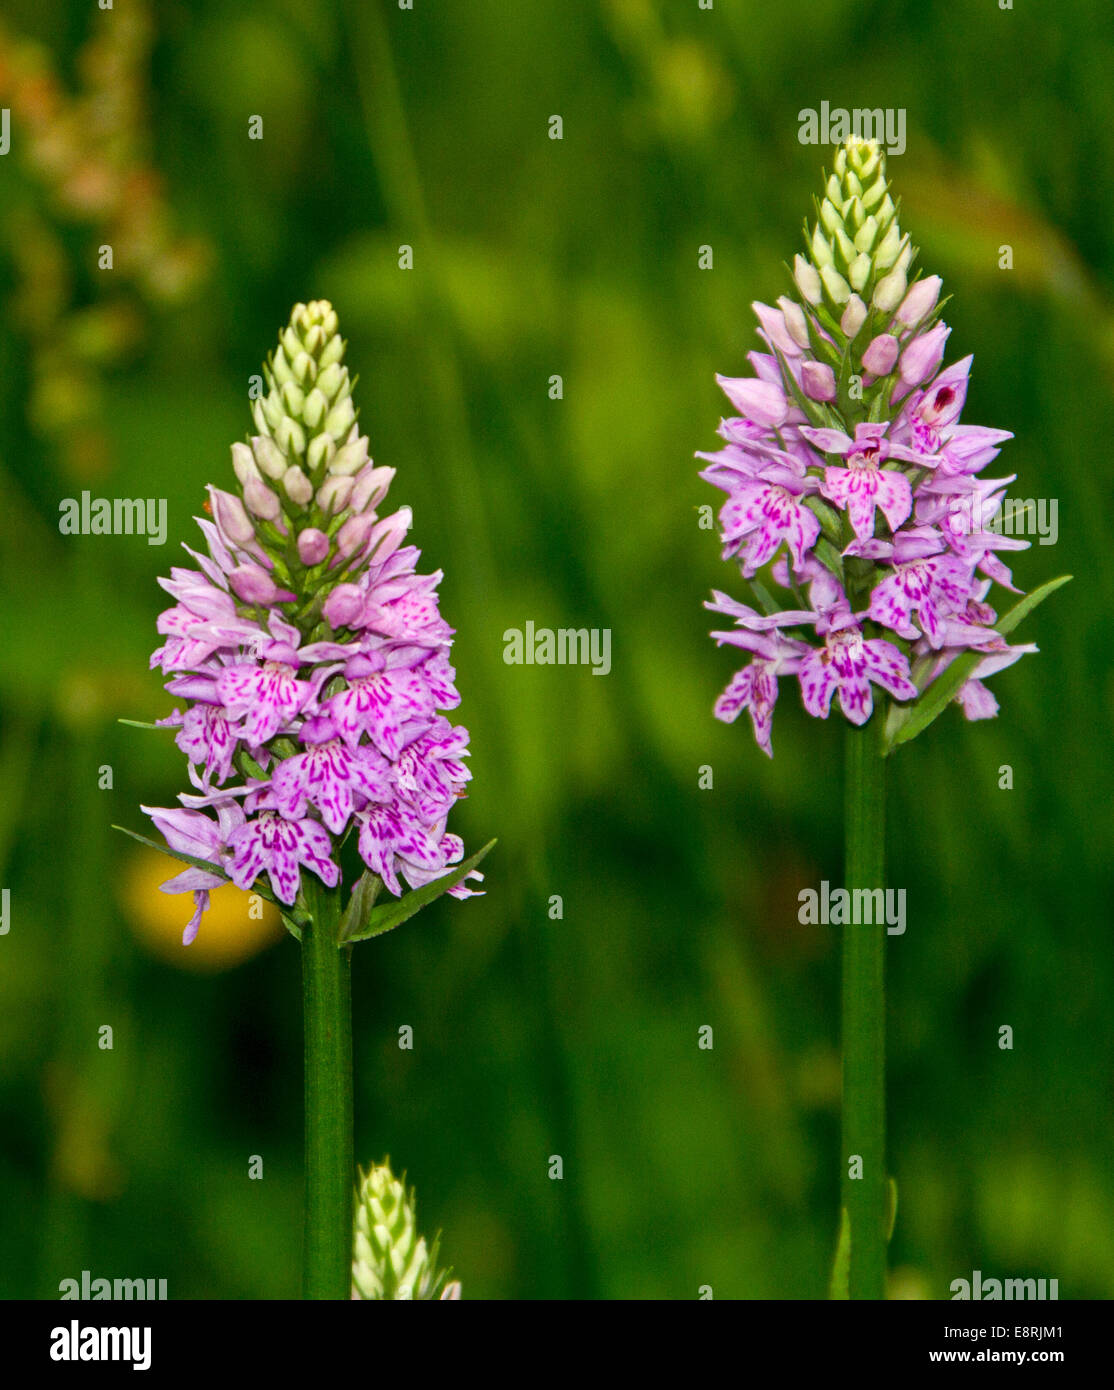 Two spikes of pink flowers of common spotted orchid, Dactylorhiza fuchsii, British wildflowers, against emerald green background Stock Photo